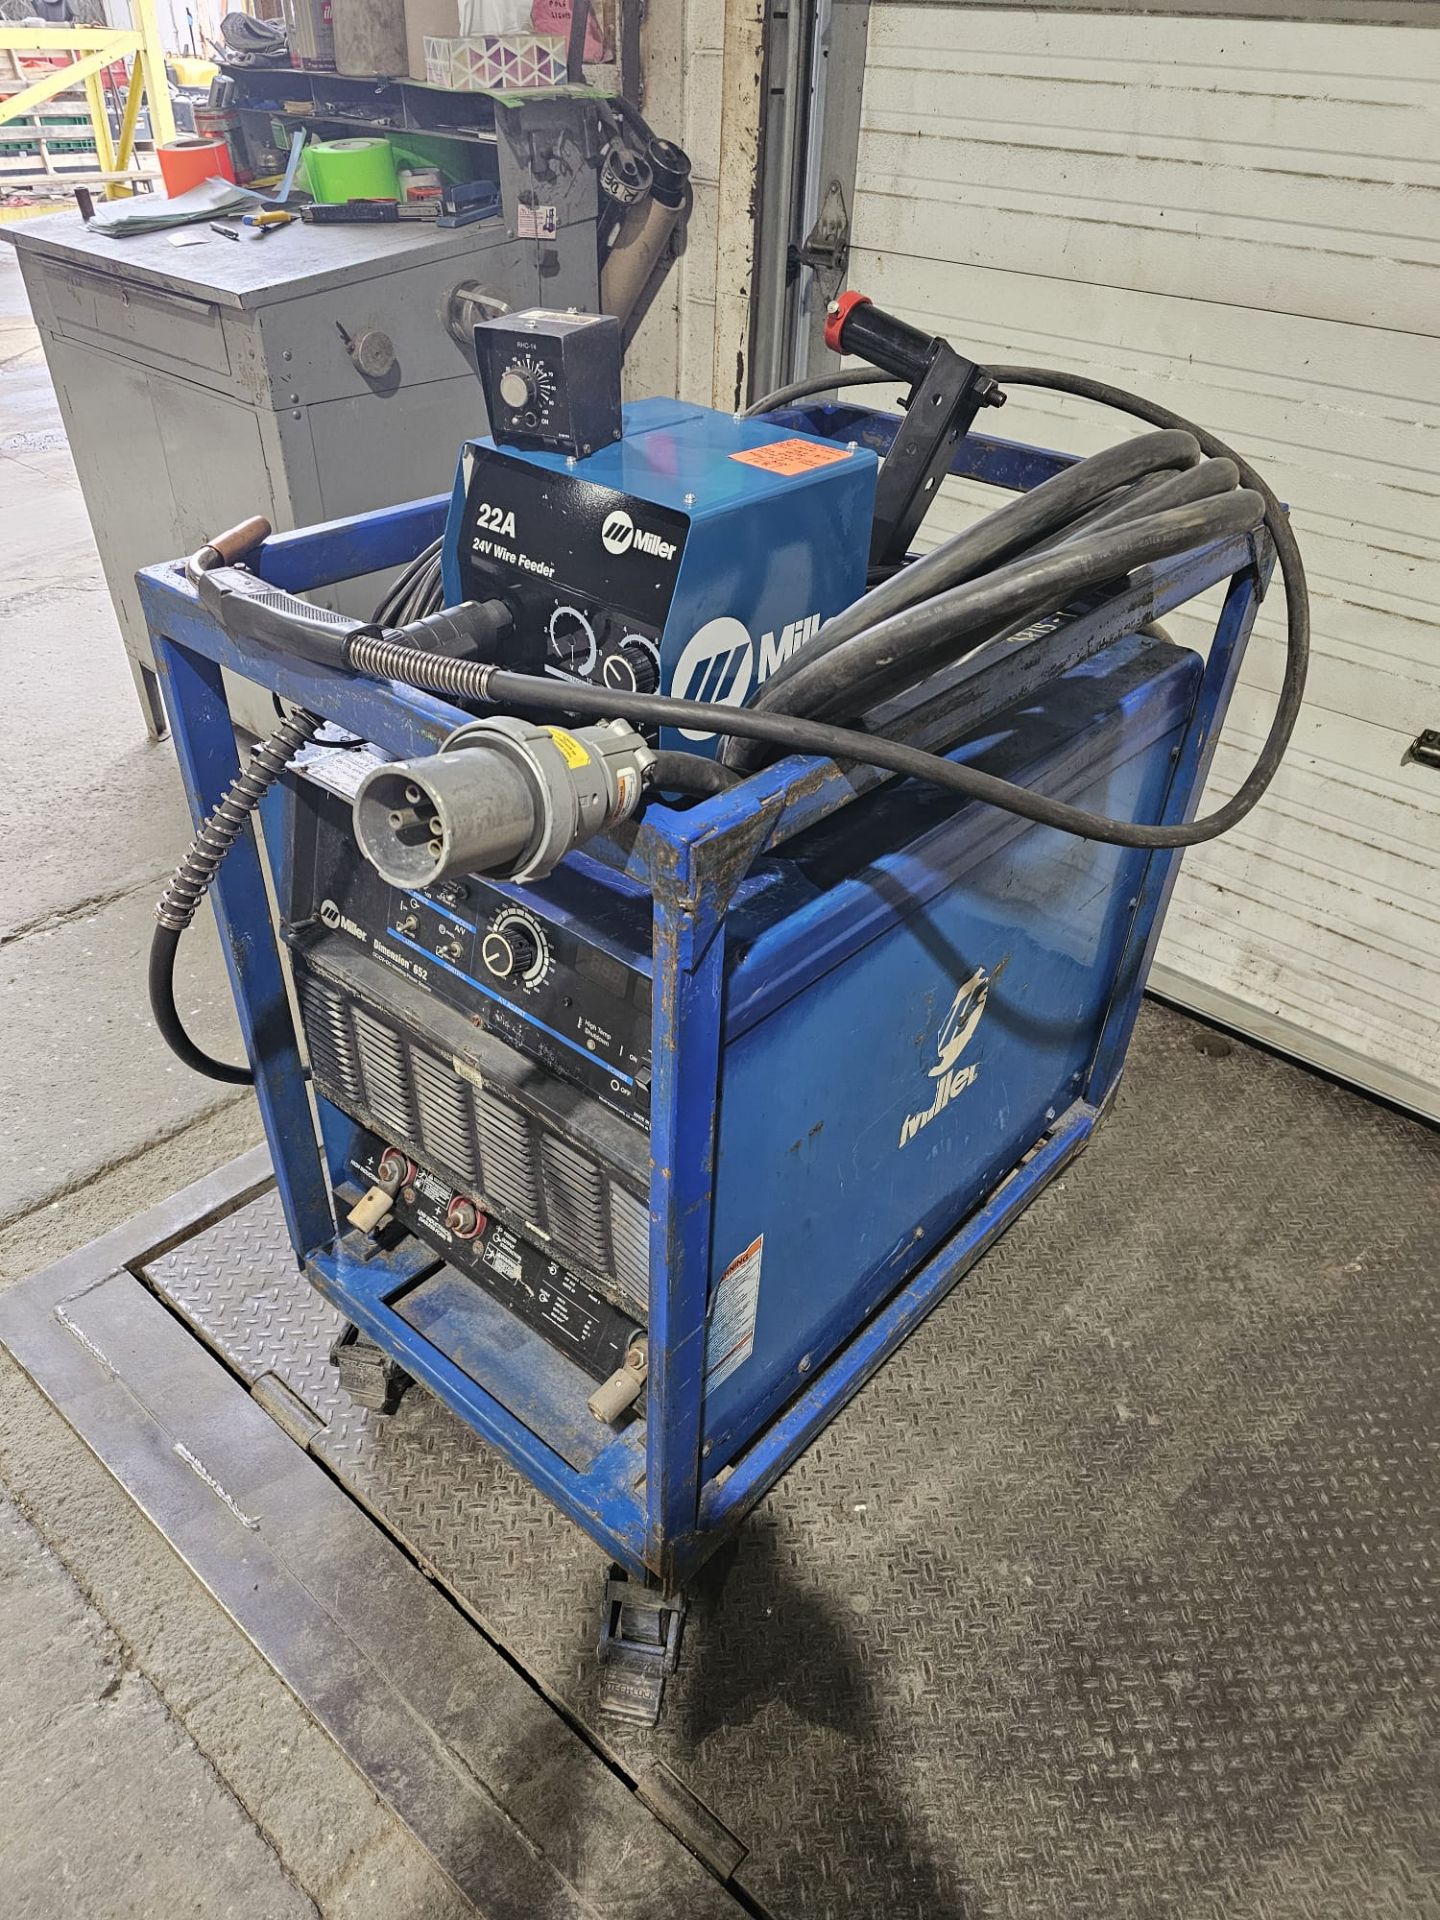 Miller Dimension 652 Mig Welder 650 Amp Mig Tig Stick Multi Process Power Source with 22A Wire - Image 5 of 10